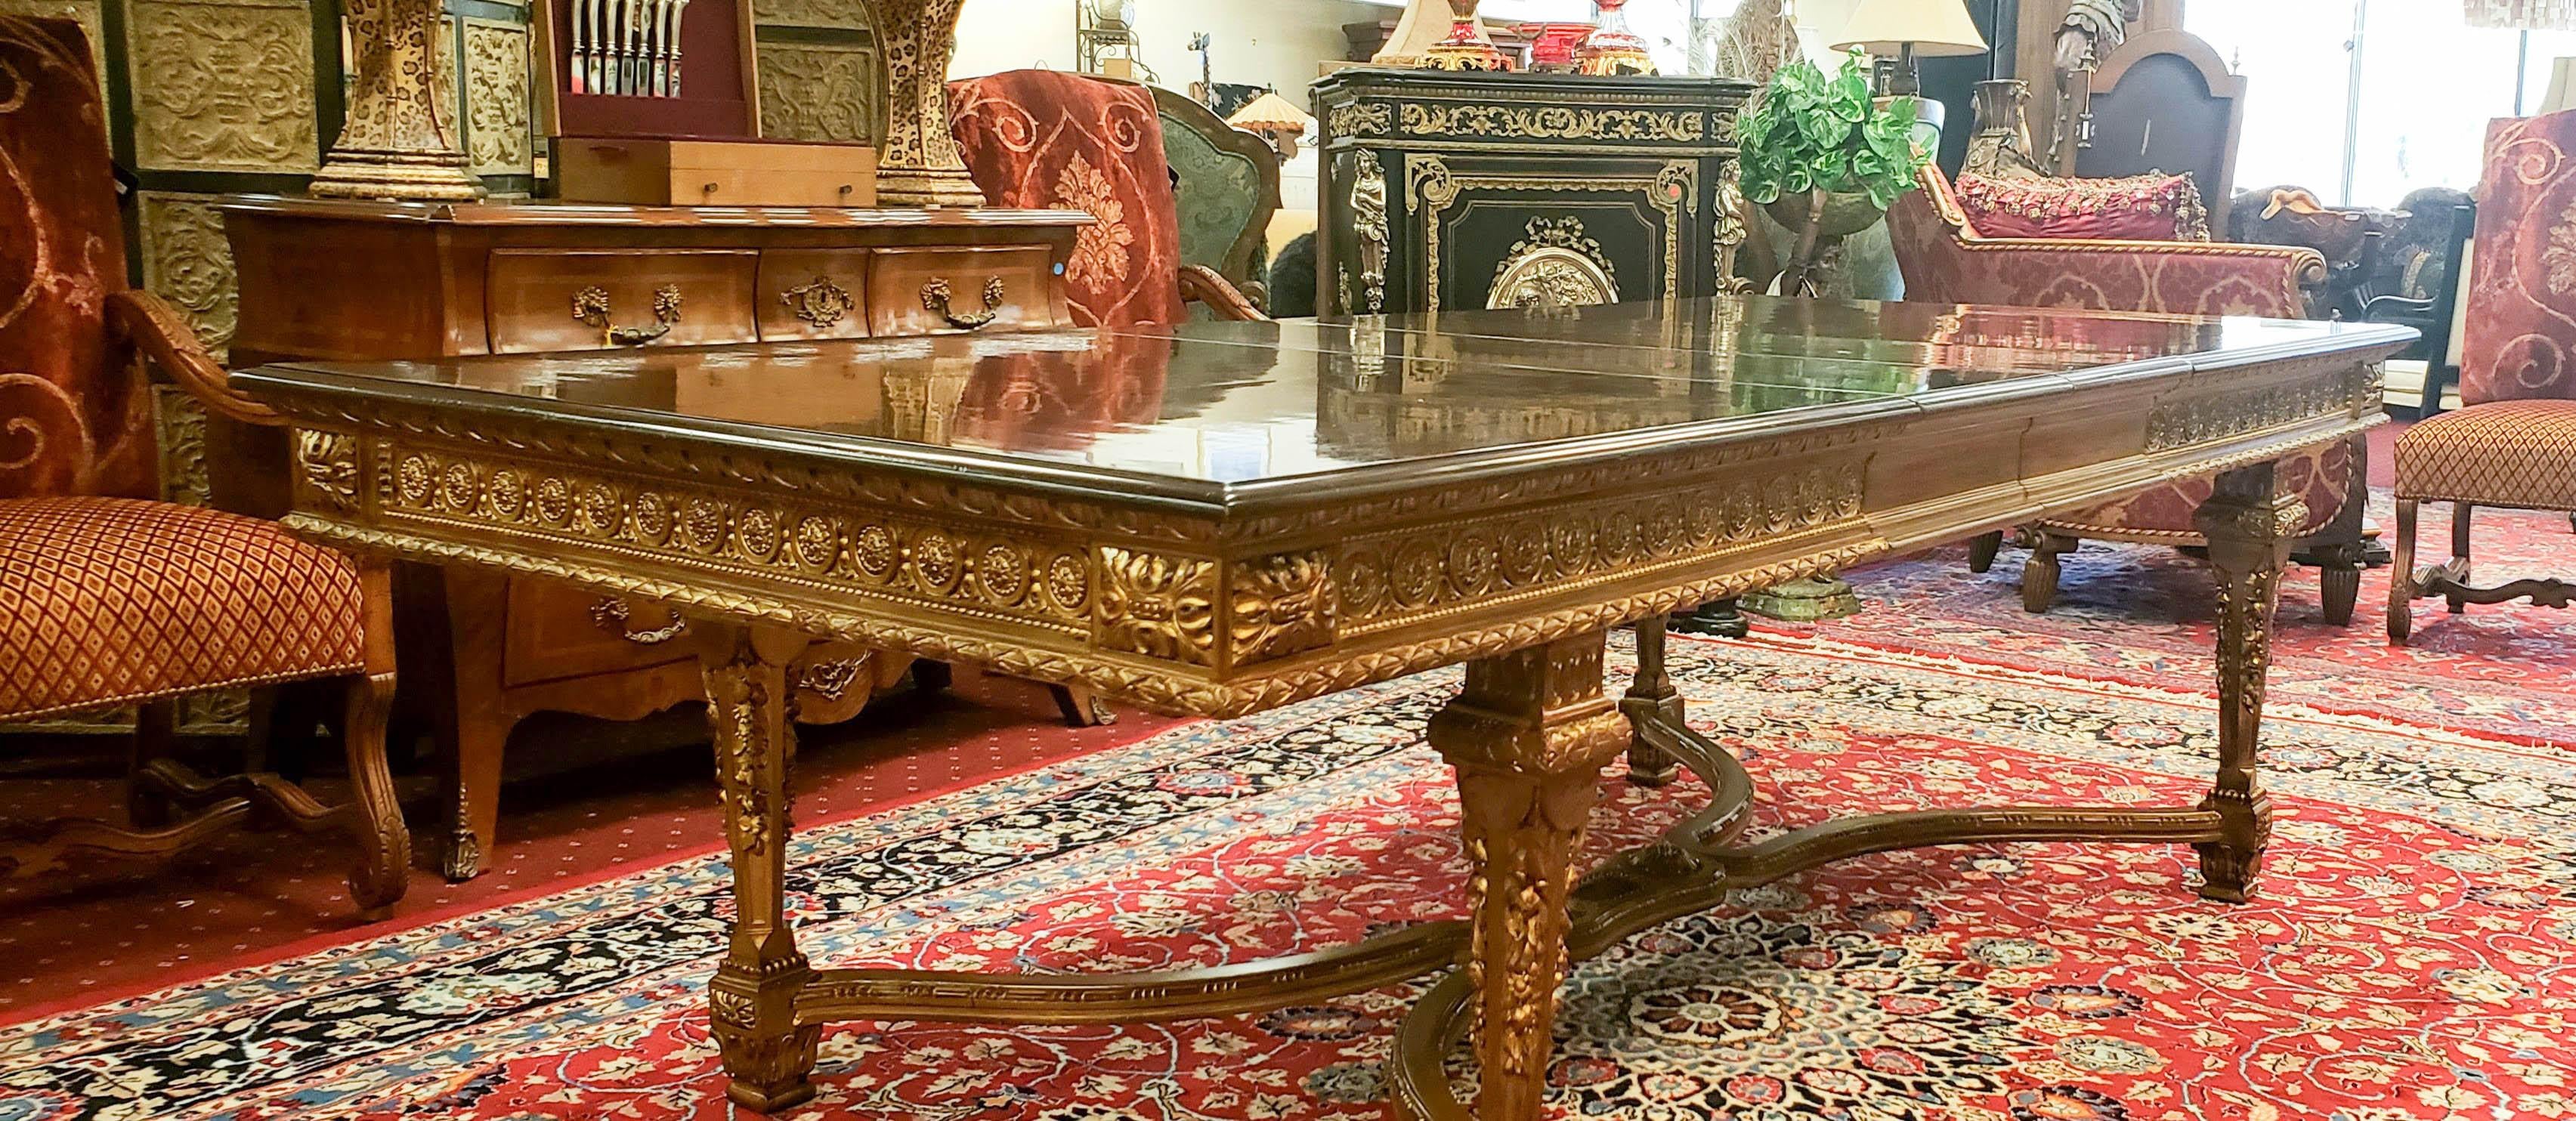 A magnificent antique French dining table. The table top is accented by a darker-tone wood border.  The apron and legs are heavily carved and finished in gilt gold, connected by a central X-shape stretcher. The three additional leaves extend the